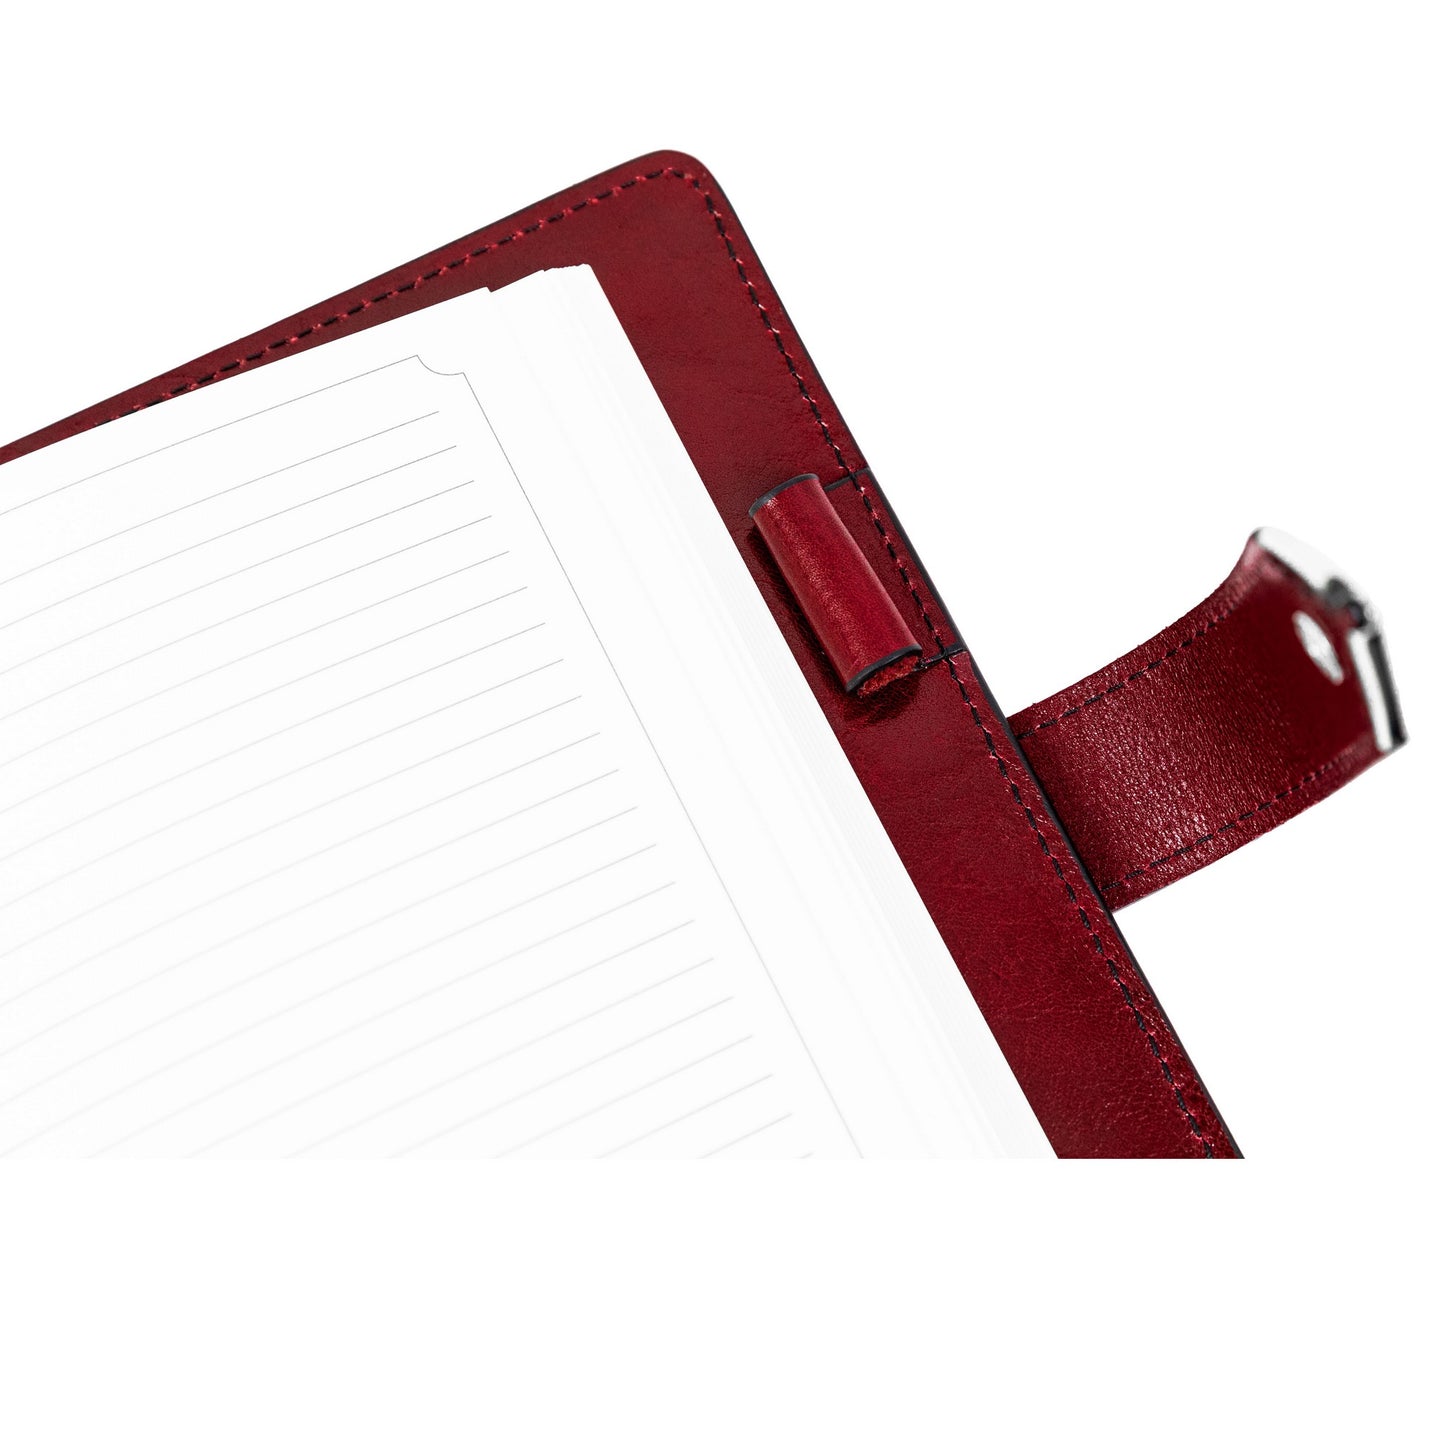 Journal en cuir avec bloc-notes rechargeable A5 - In Search of Lost Time